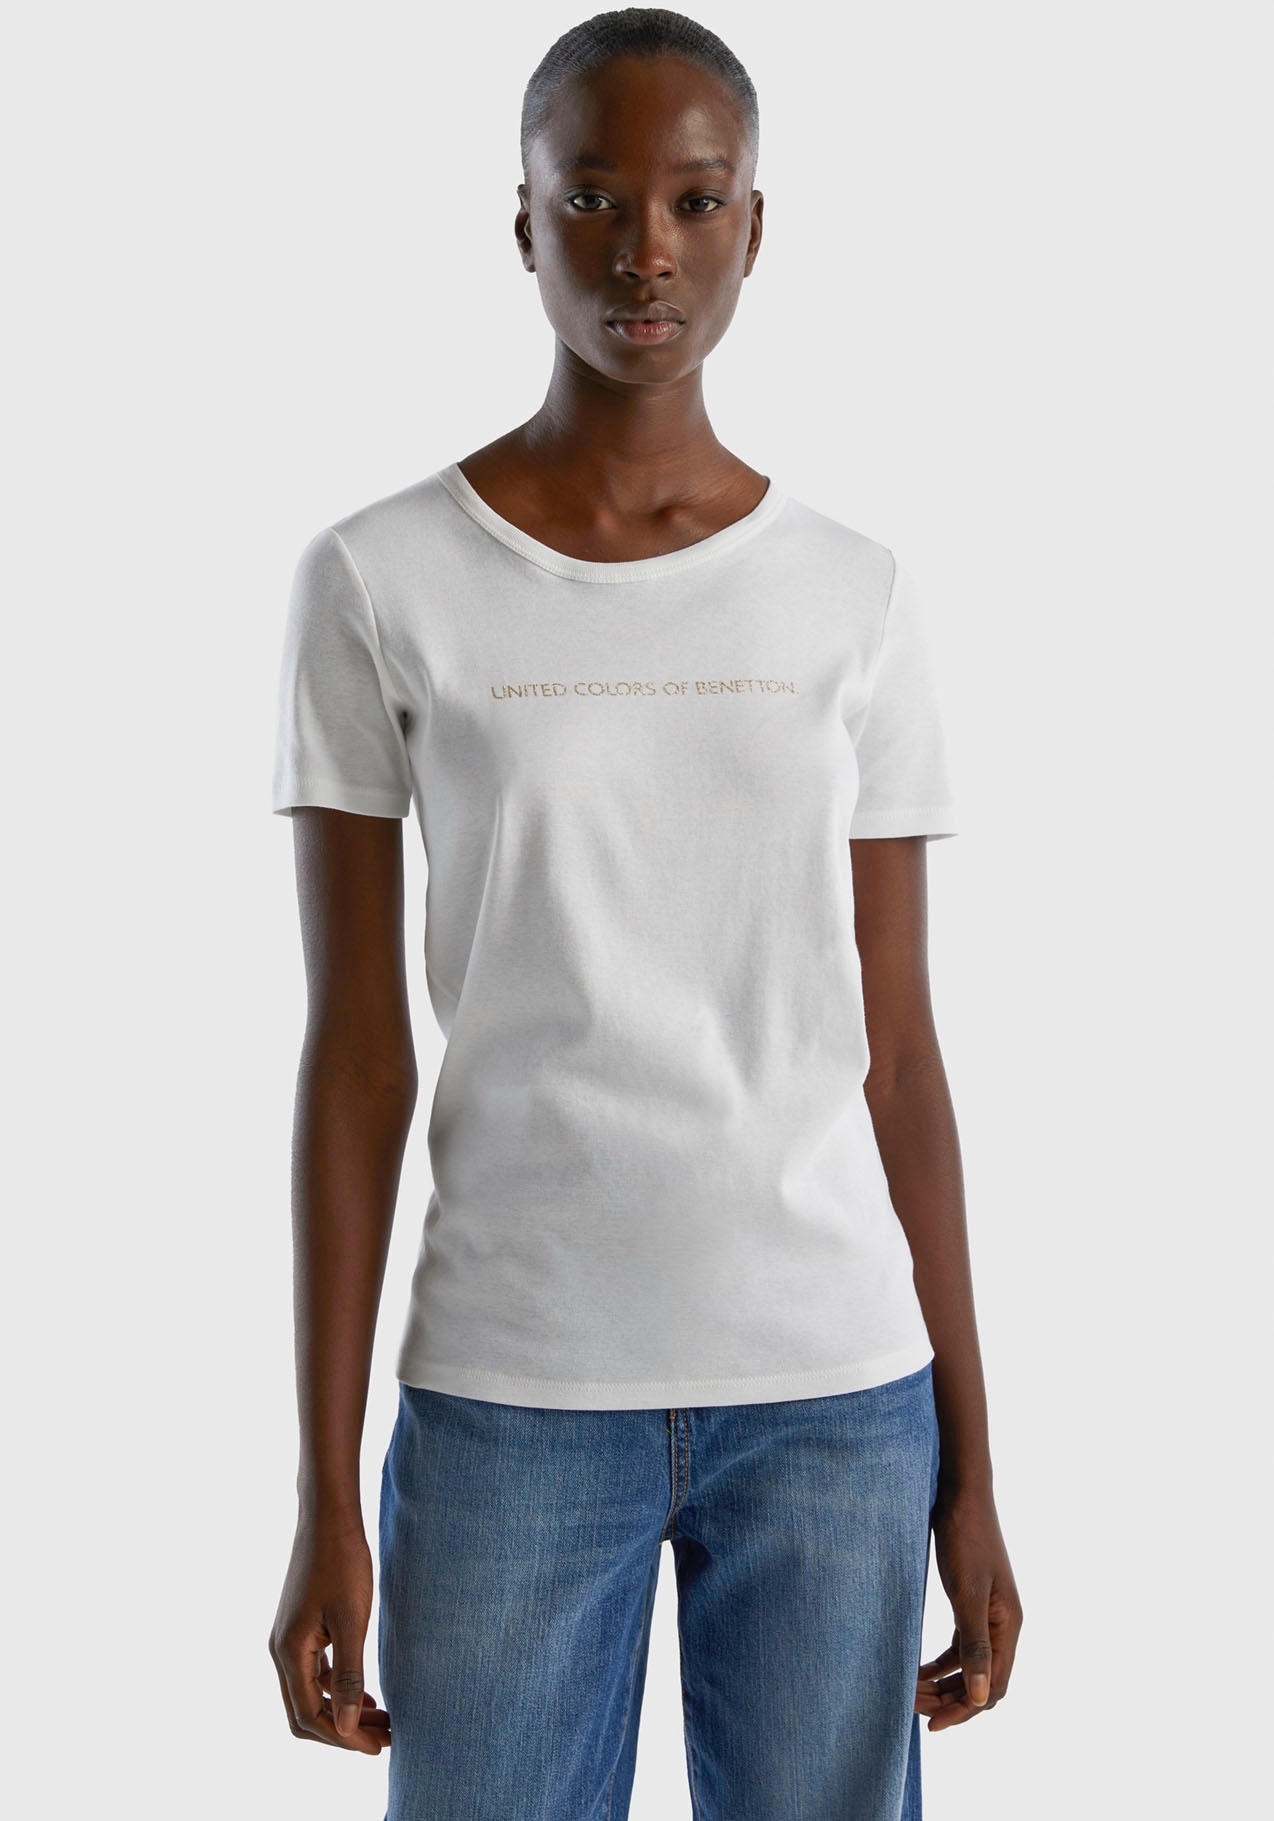 United Colors of Benetton T-Shirt, (1 tlg.), mit glitzerndem Druck von United Colors of Benetton